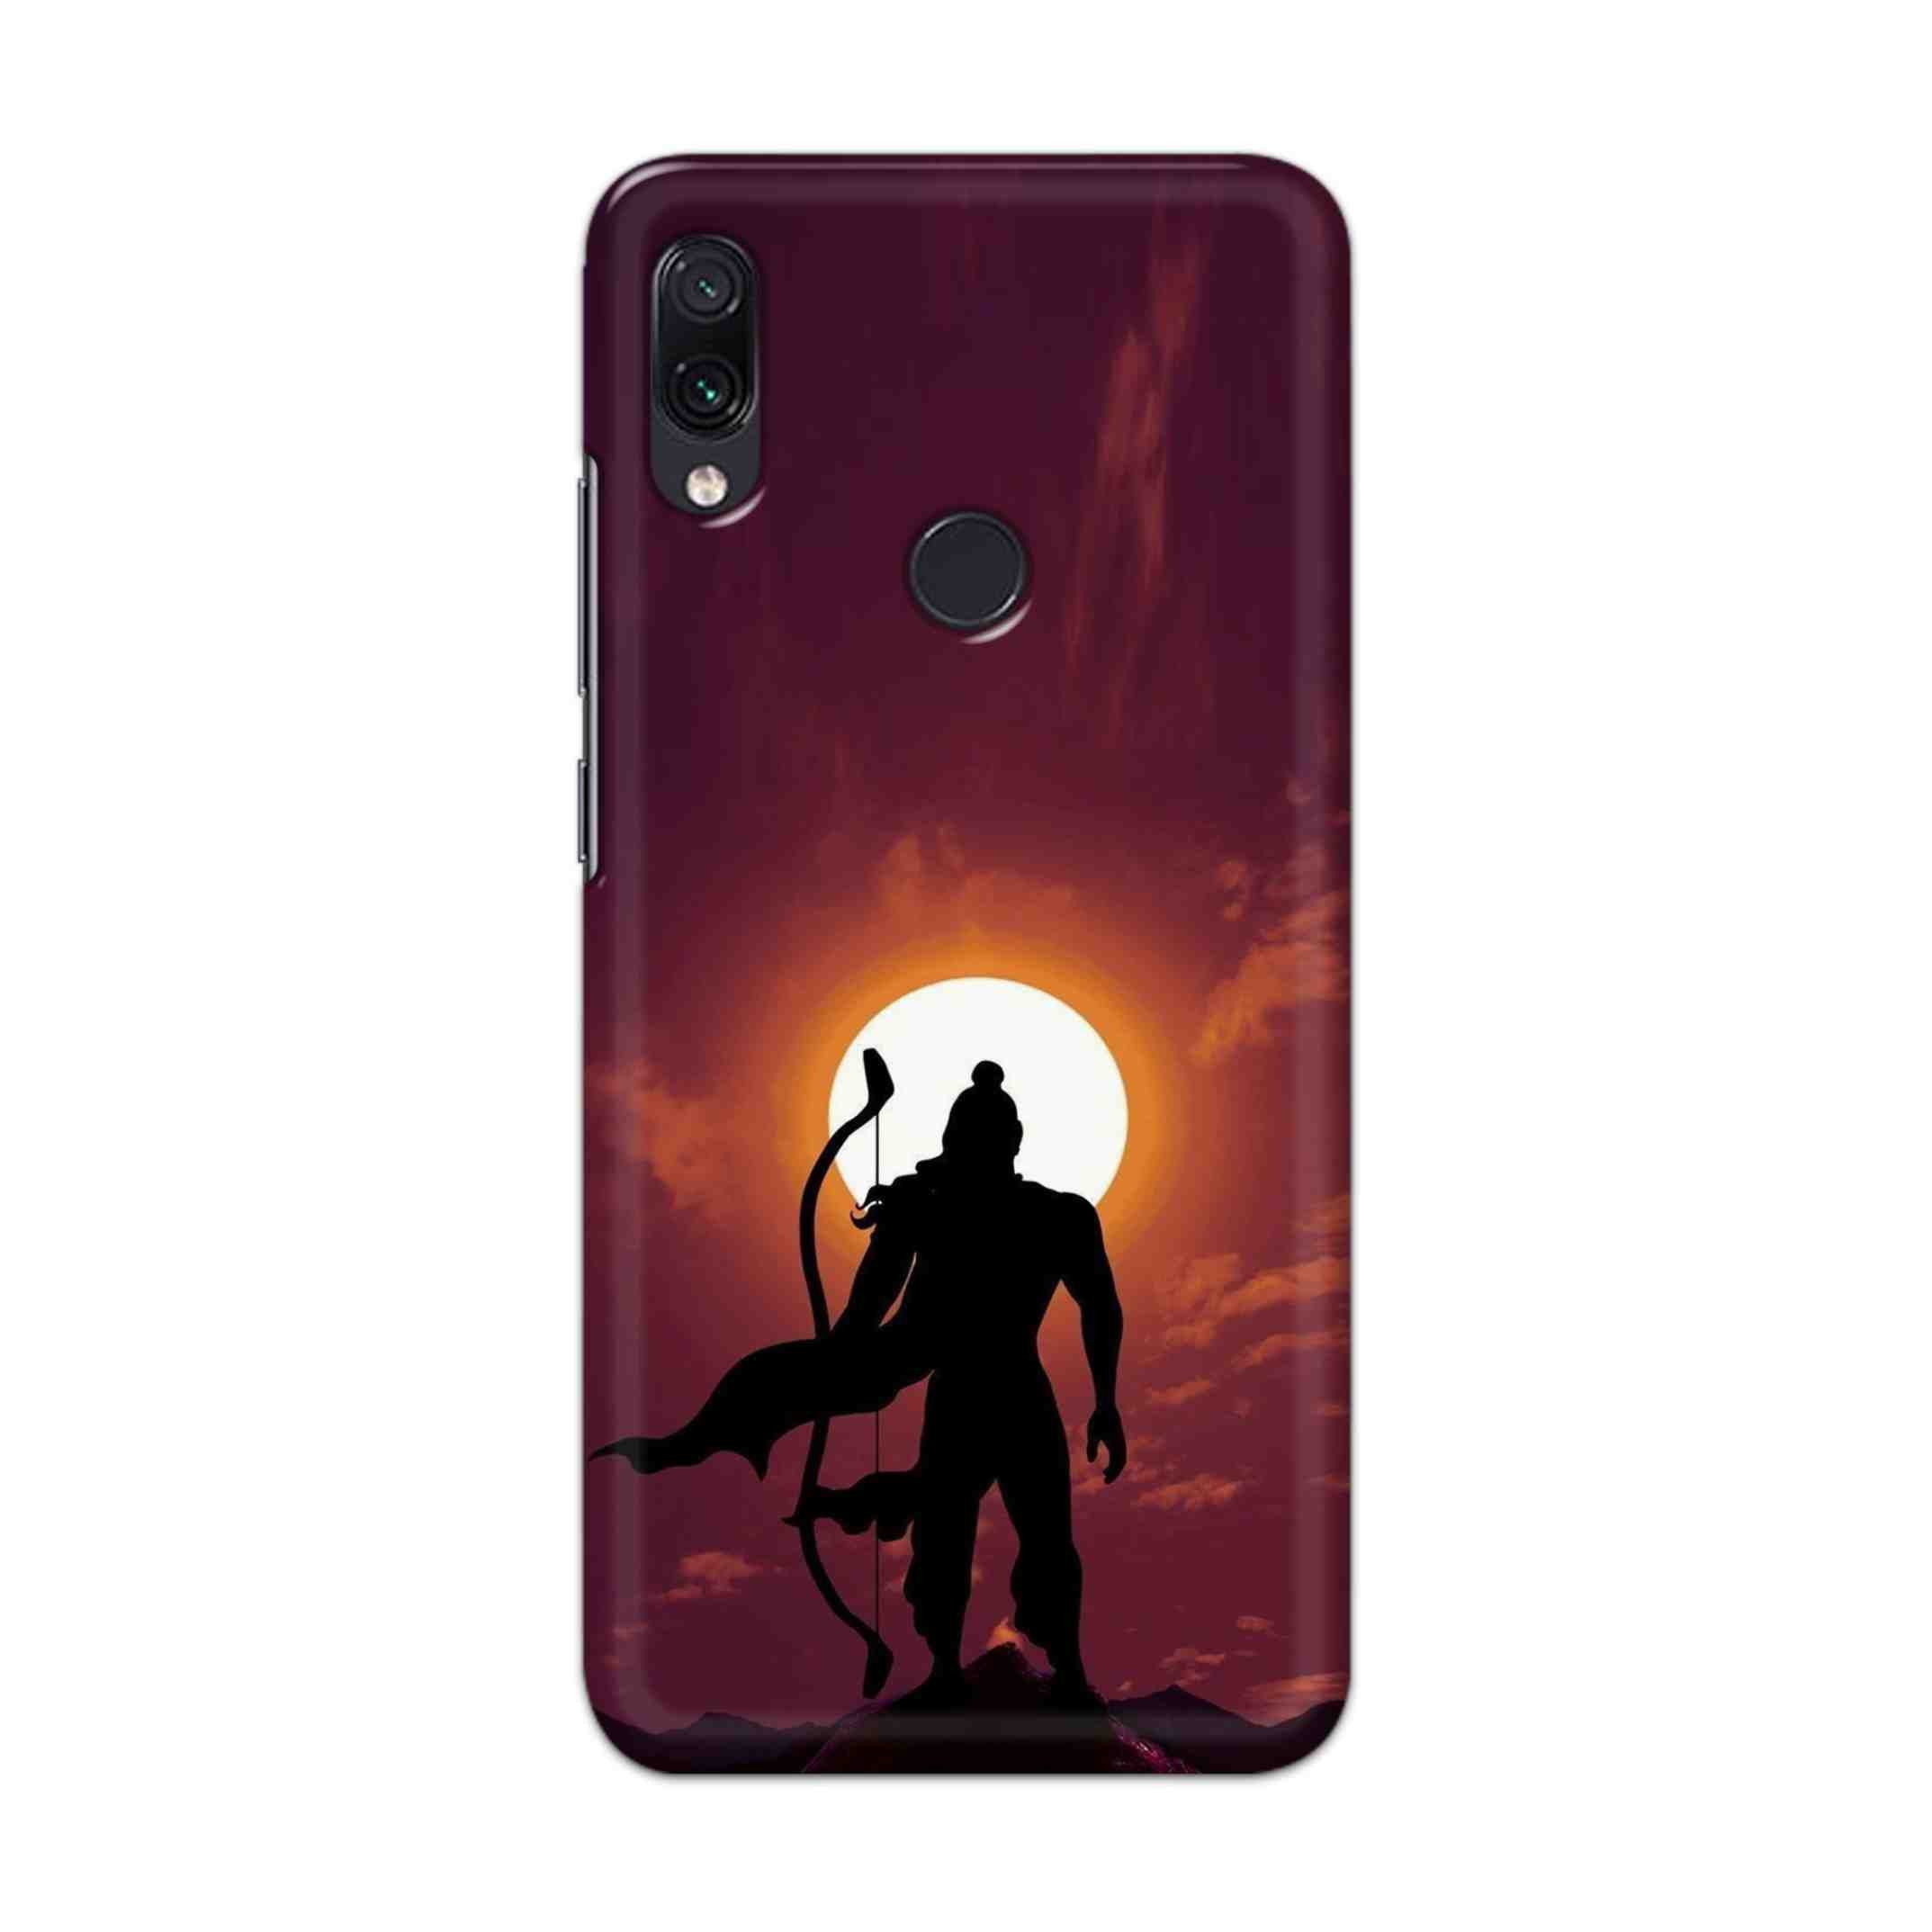 Buy Ram Hard Back Mobile Phone Case Cover For Xiaomi Redmi 7 Online